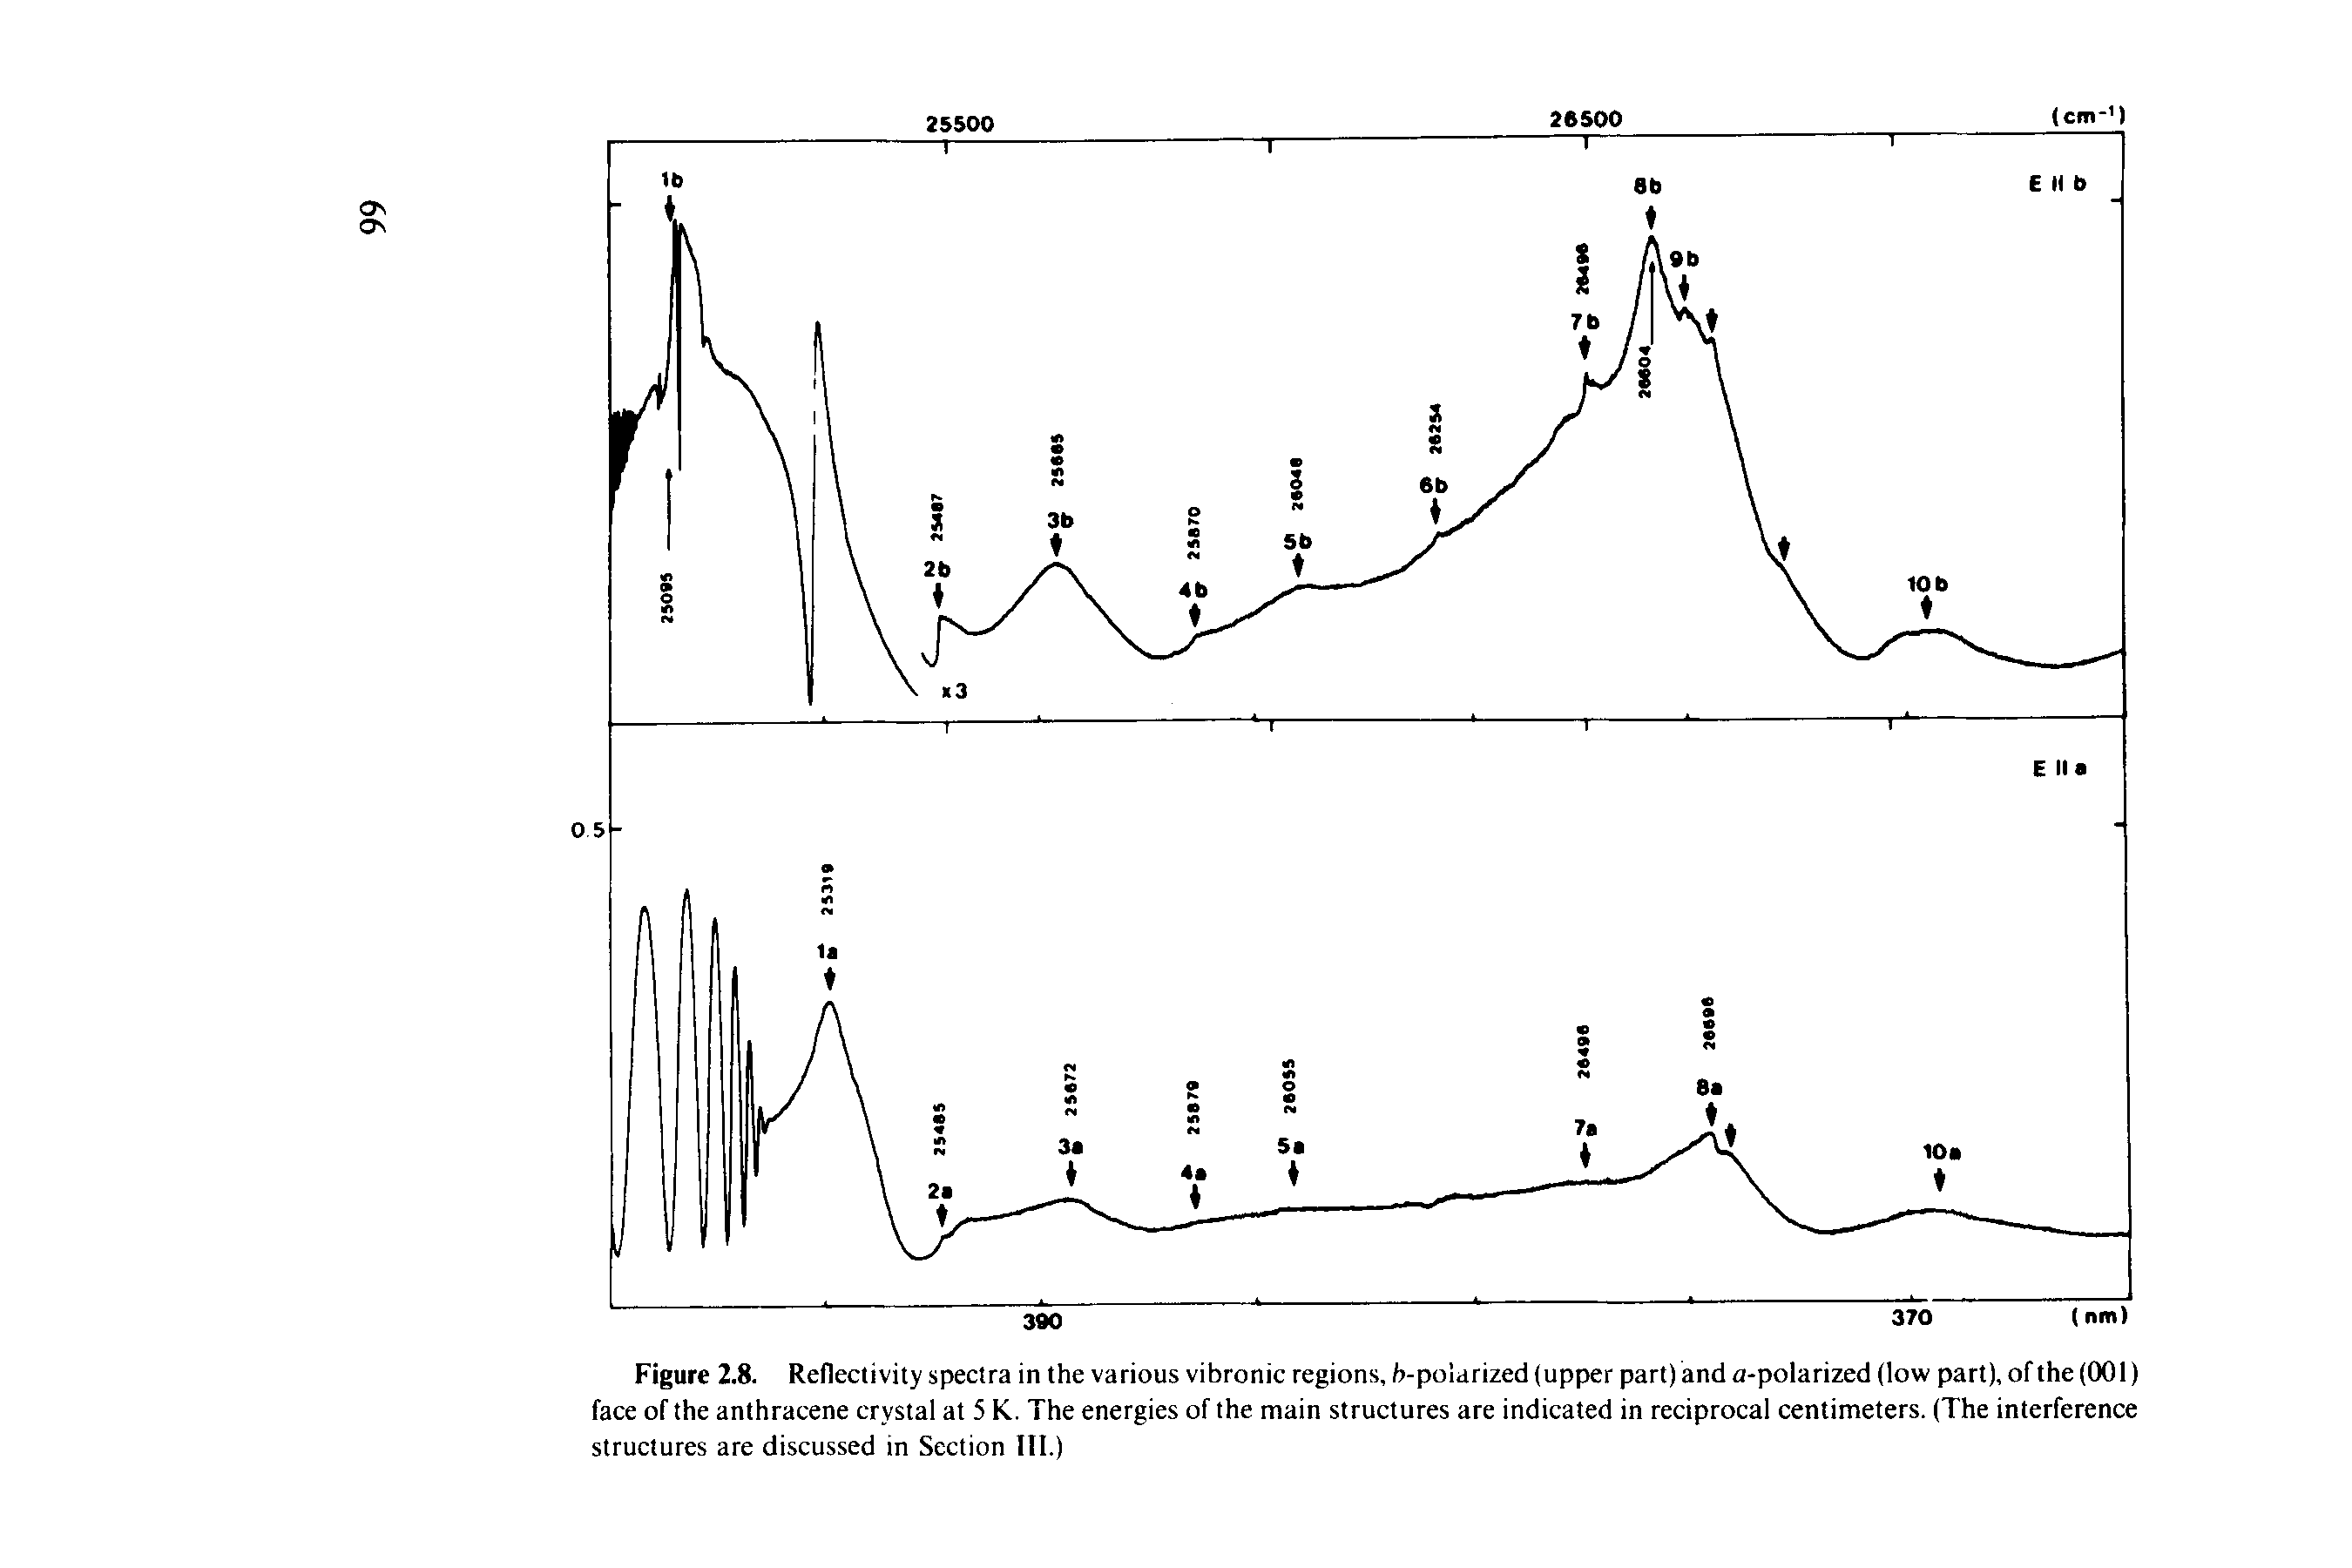 Figure 2.8. Reflectivity spectra in the various vibronic regions, b-polarized (upper part) and a-polarized (low part), of the (001) face of the anthracene crystal at 5 K. The energies of the main structures are indicated in reciprocal centimeters. (The interference structures are discussed in Section III.)...